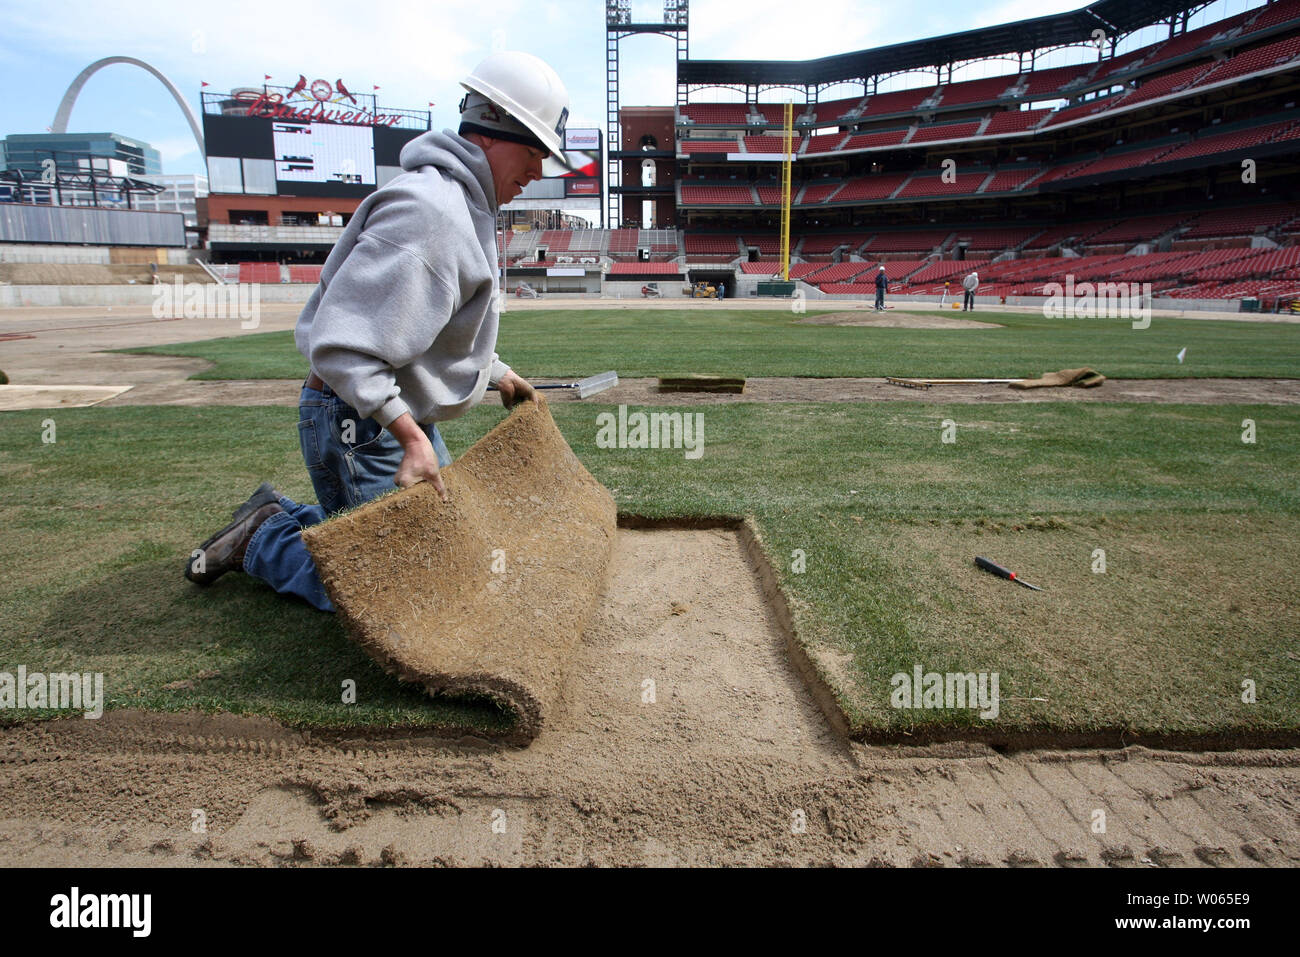 Grounds crew member Ryan Middleton carefully cuts and lays sod grass on the infield of the new Busch Stadium in St. Louis on March 15, 2006. Nearly 20 truckloads of sod from Fort Morgan, CO will cover the Busch Stadium playing surface, about 100 thousand square feet. The Cardinals will play their first game in the new facility on April 10. (UPI Photo/Bill Greenblatt) Stock Photo